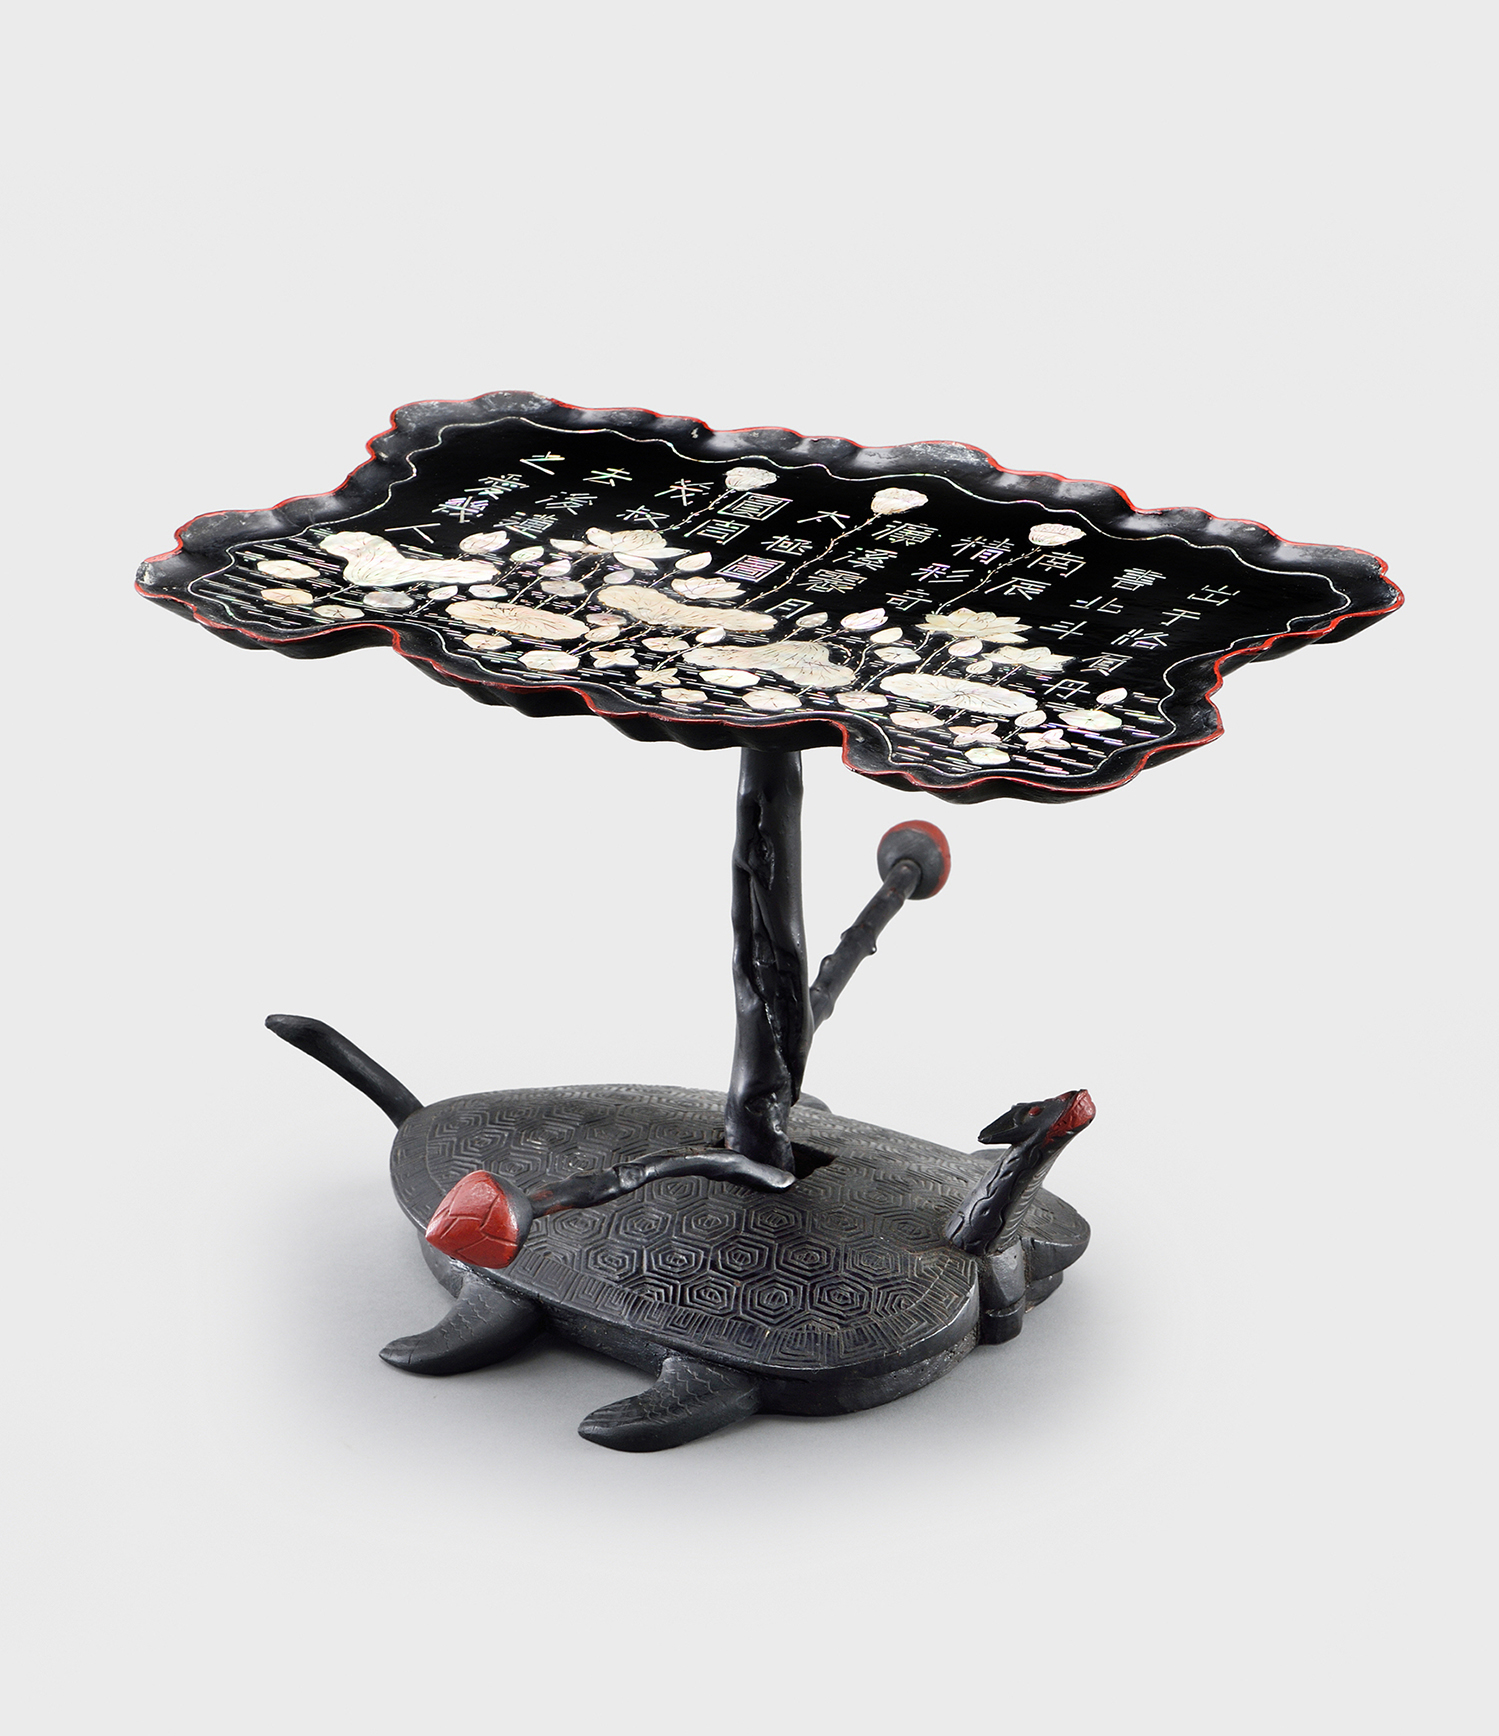 Lotus-shaped Table with a Turtle-shaped Pedestal and Lotus Pond Design in Mother-of-pearl Inlay